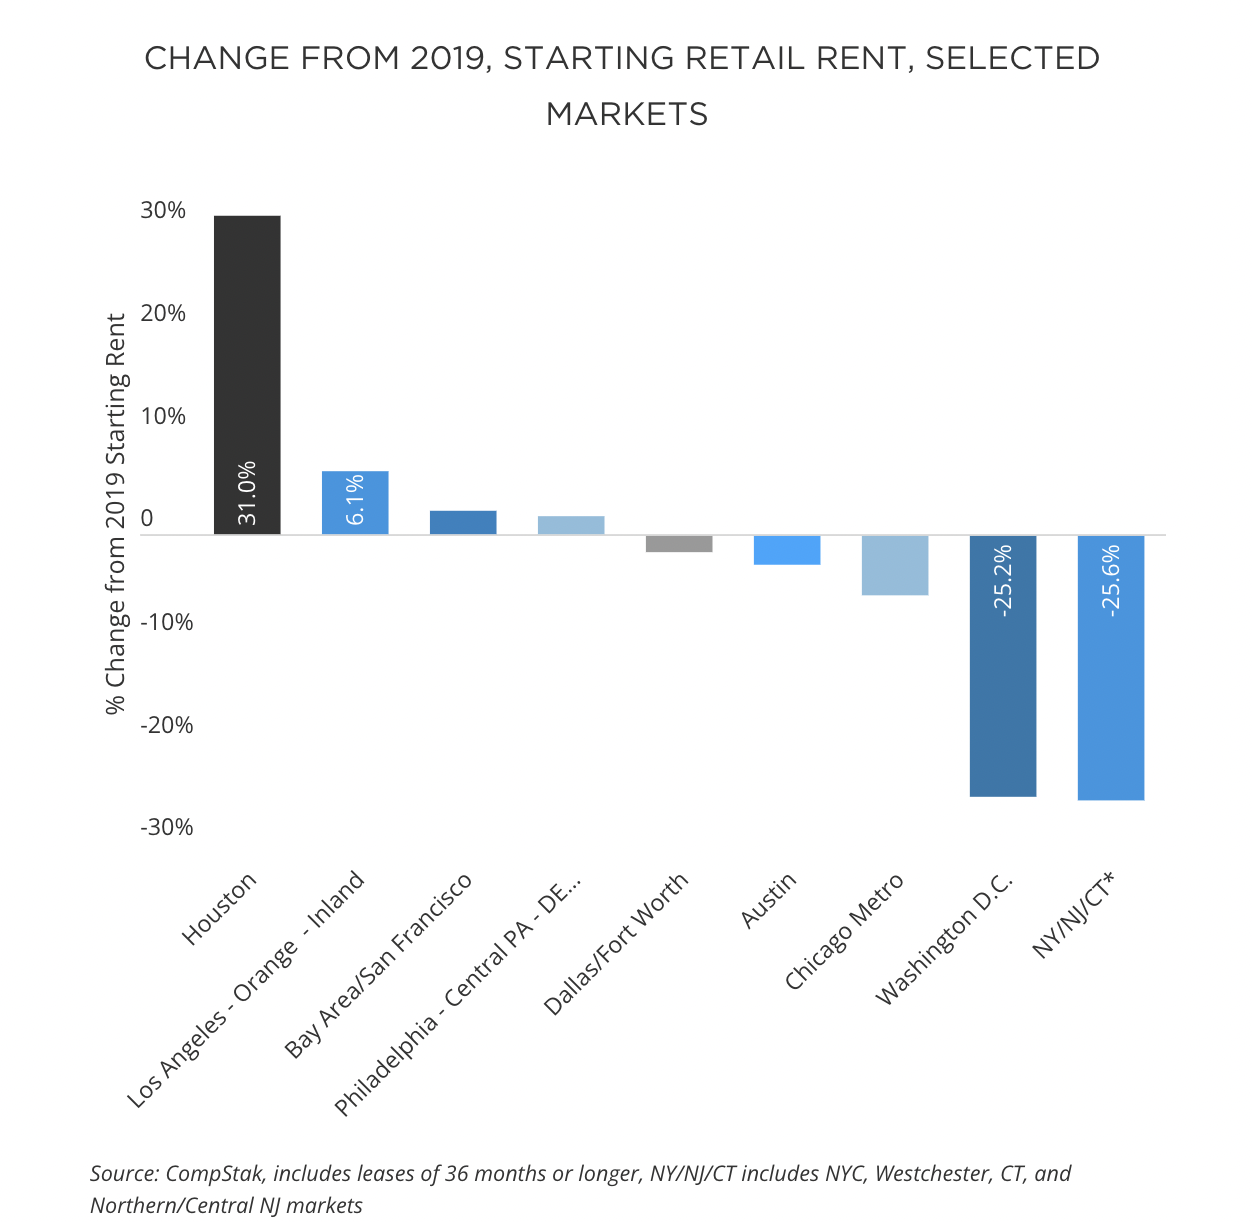 CHANGE FROM 2019, STARTING RETAIL RENT, SELECTED MARKETS based on CompStak data